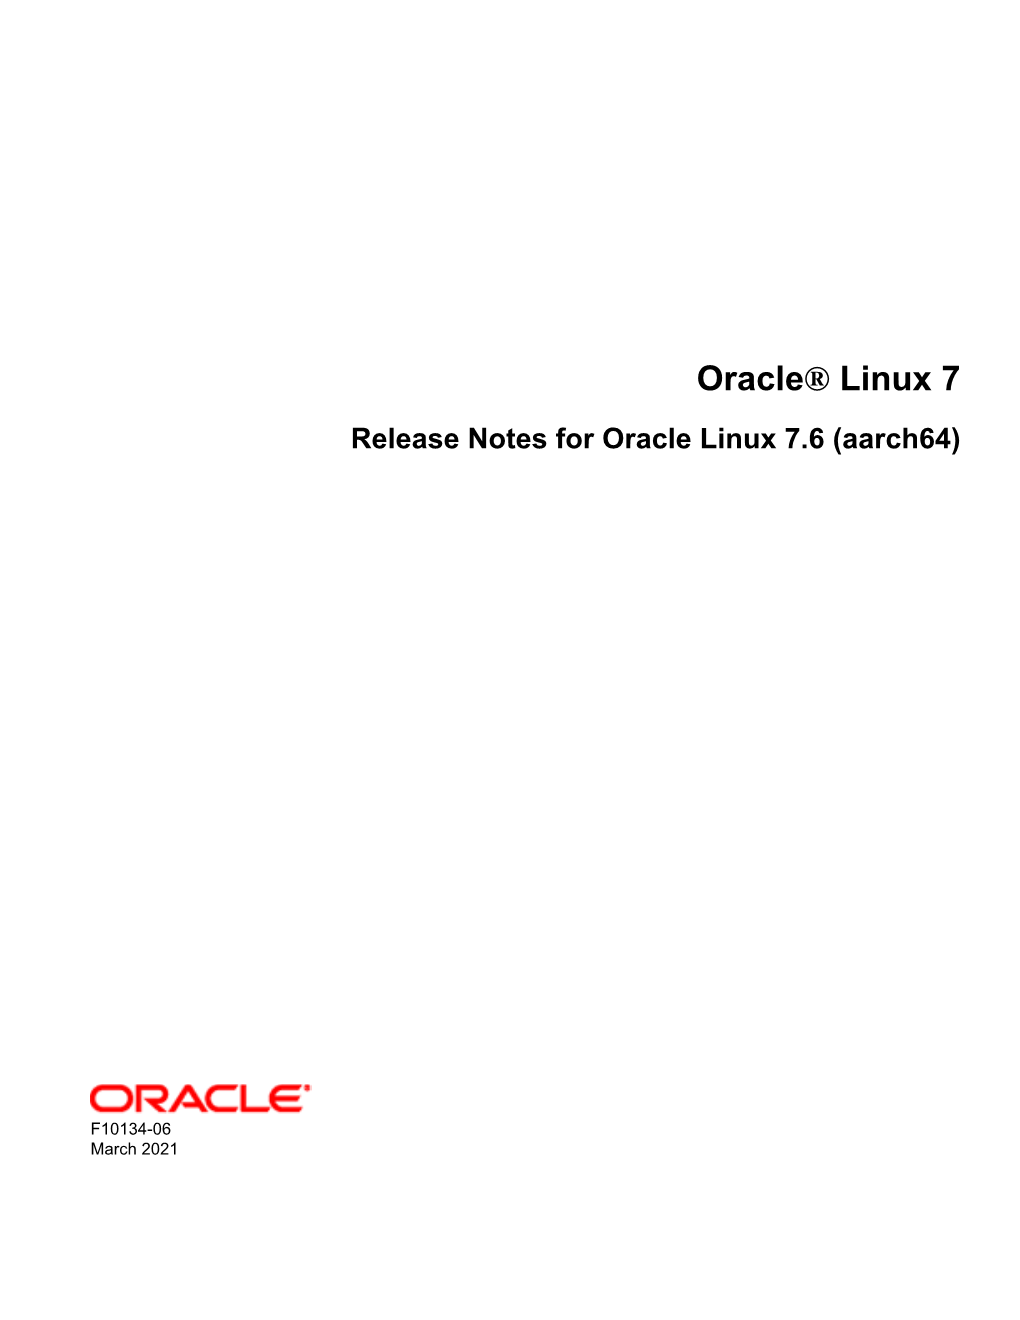 Oracle® Linux 7 Release Notes for Oracle Linux 7.6 (Aarch64)